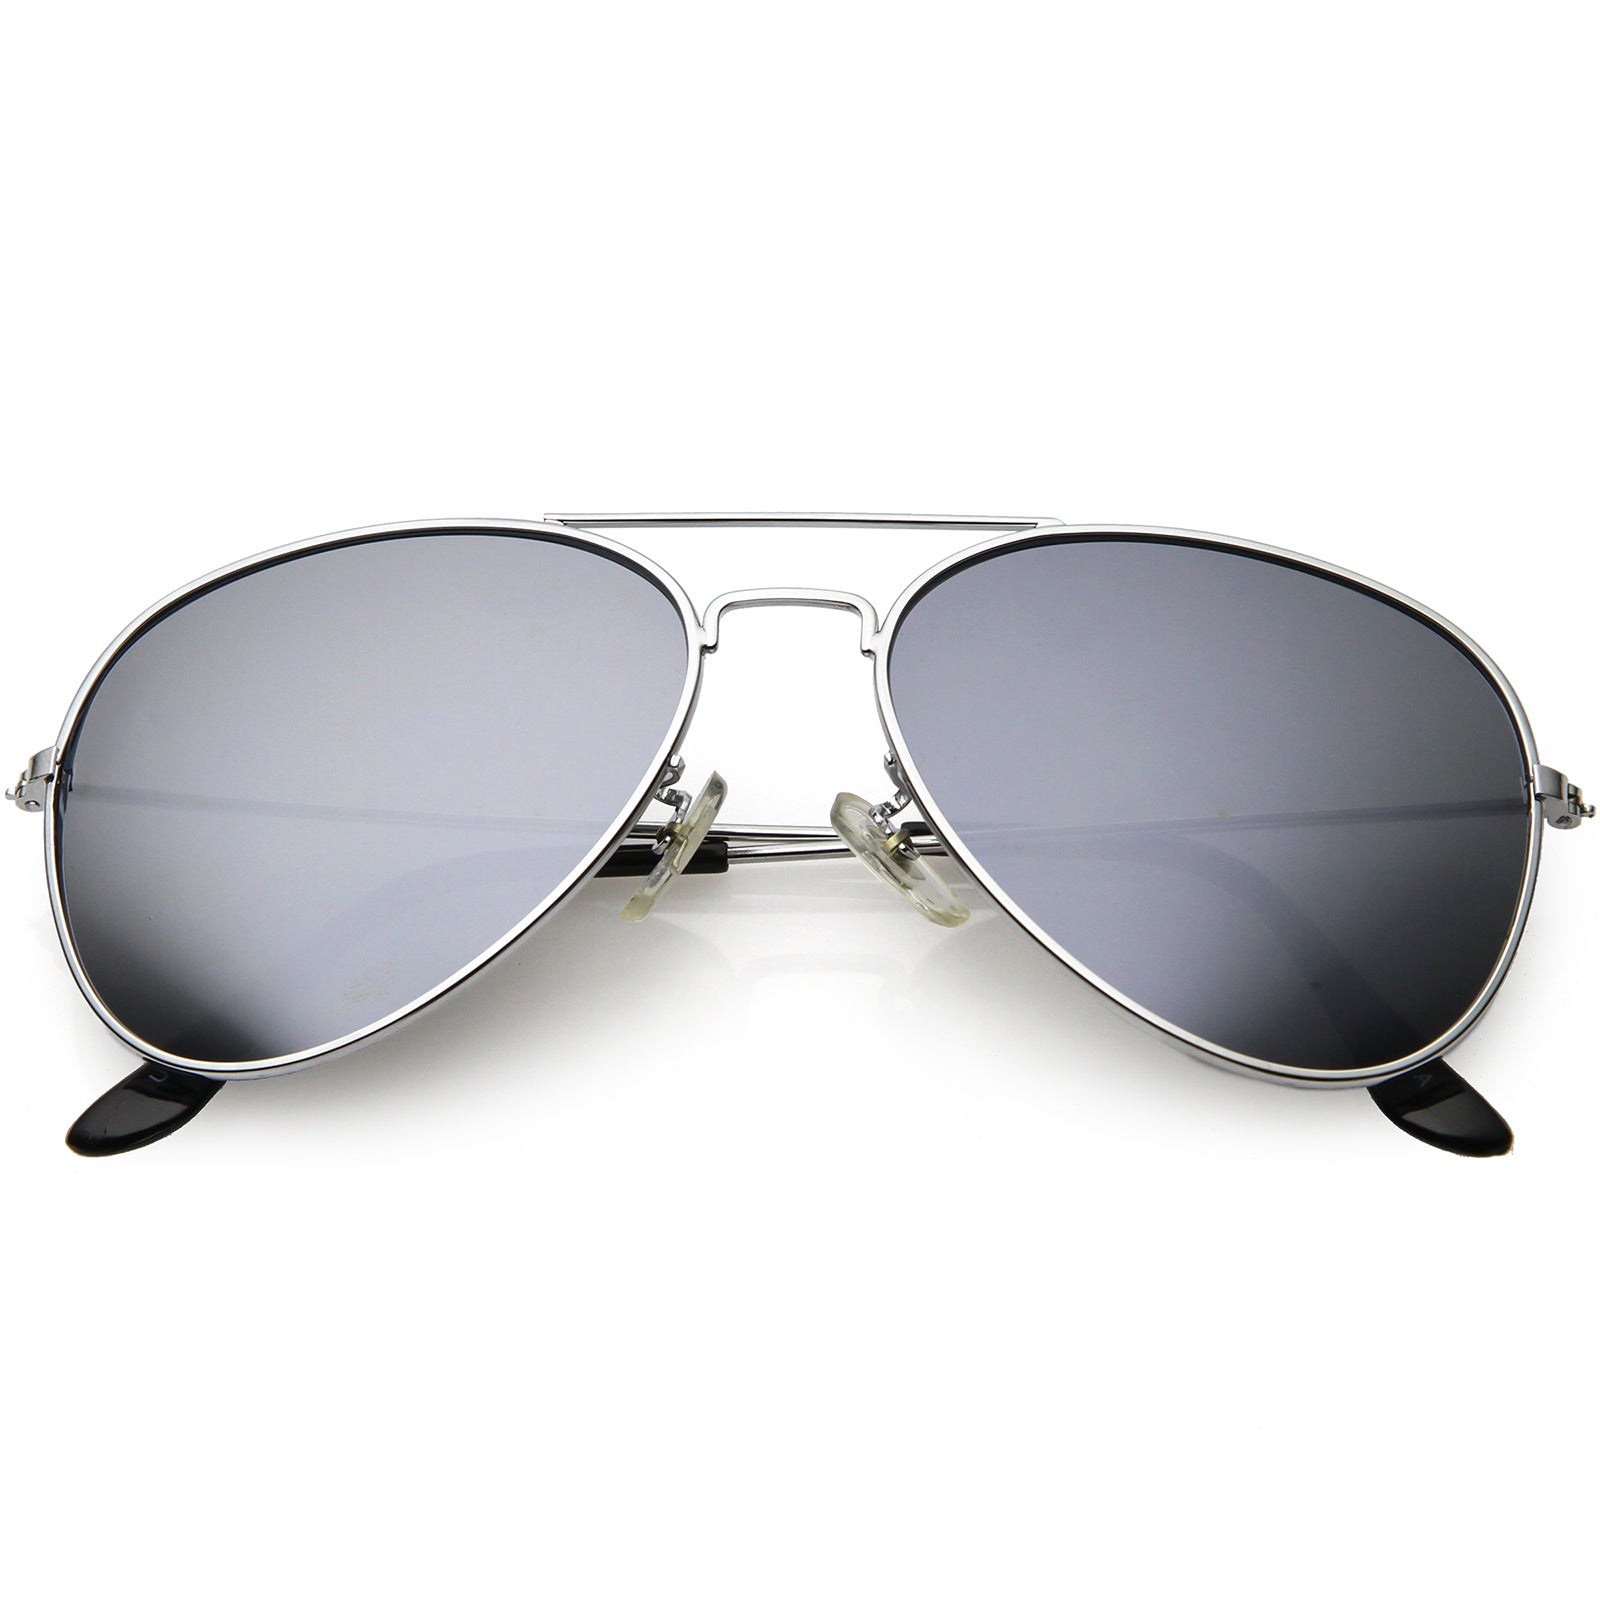 Silver Metal Frame Aviator Sunglasses with Silver Mirror lens